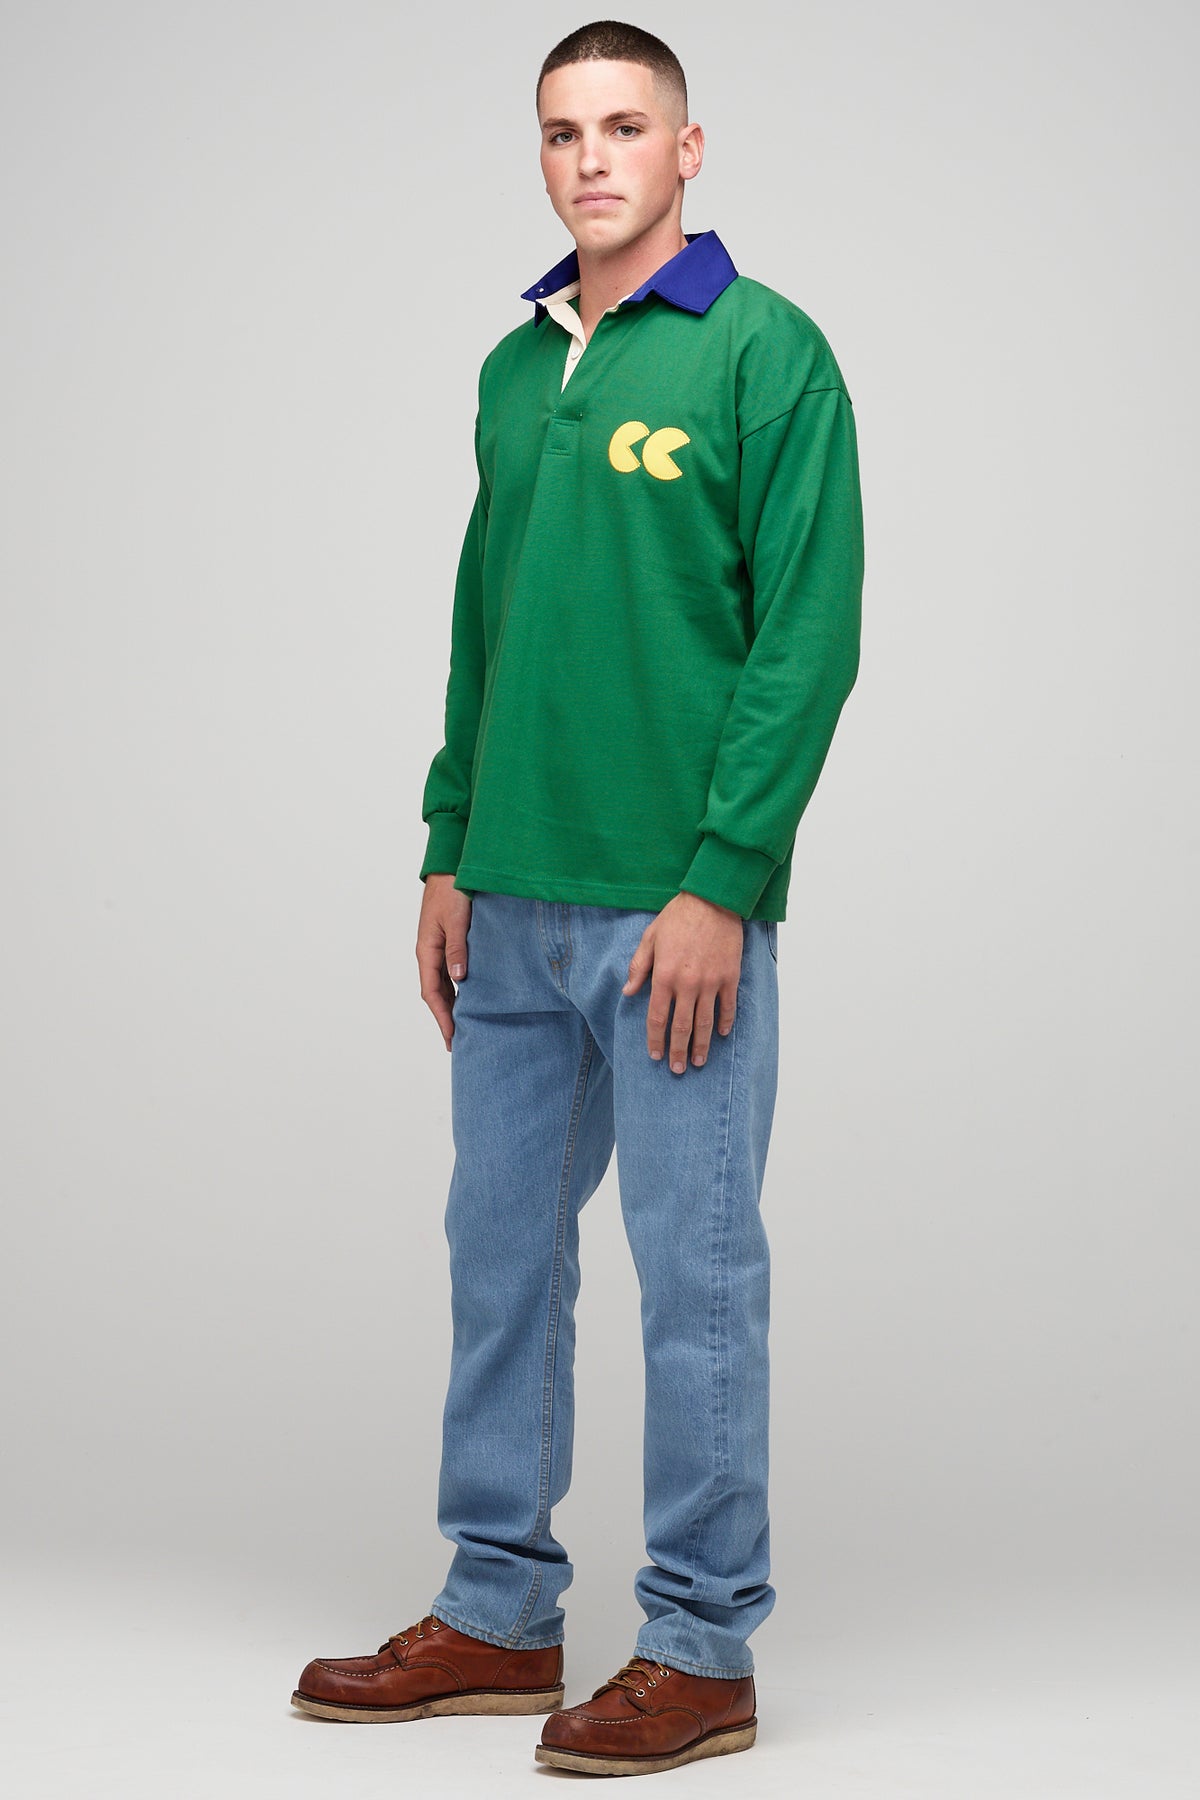 
            White, brunette male, wearing green rugby shirt with contrast blue collar, yellow CC logo badge 